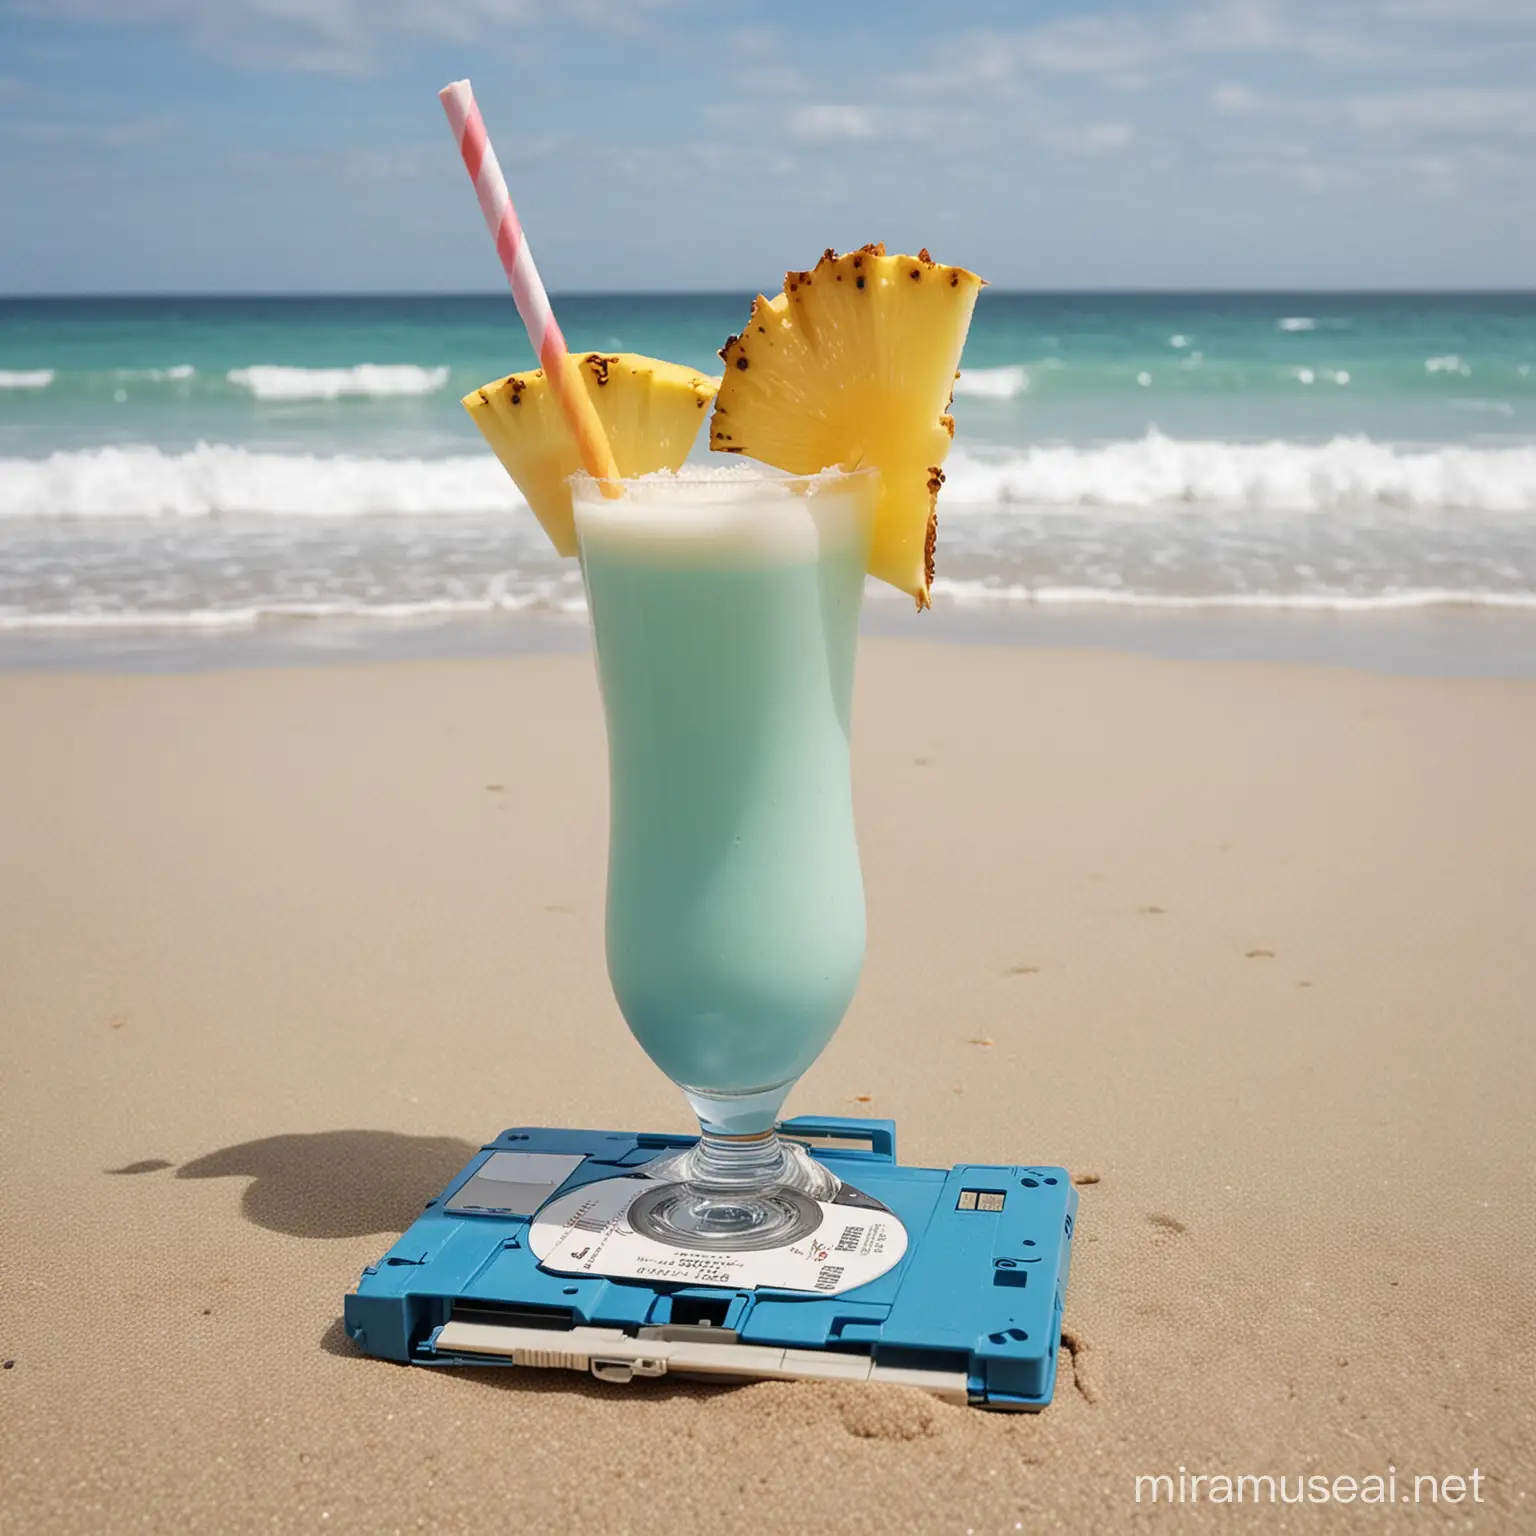 A Blue Floppy Disk on a beach drinking a Pina Colada and thinking about making it rich. He is surrounded by hot beach babes. 